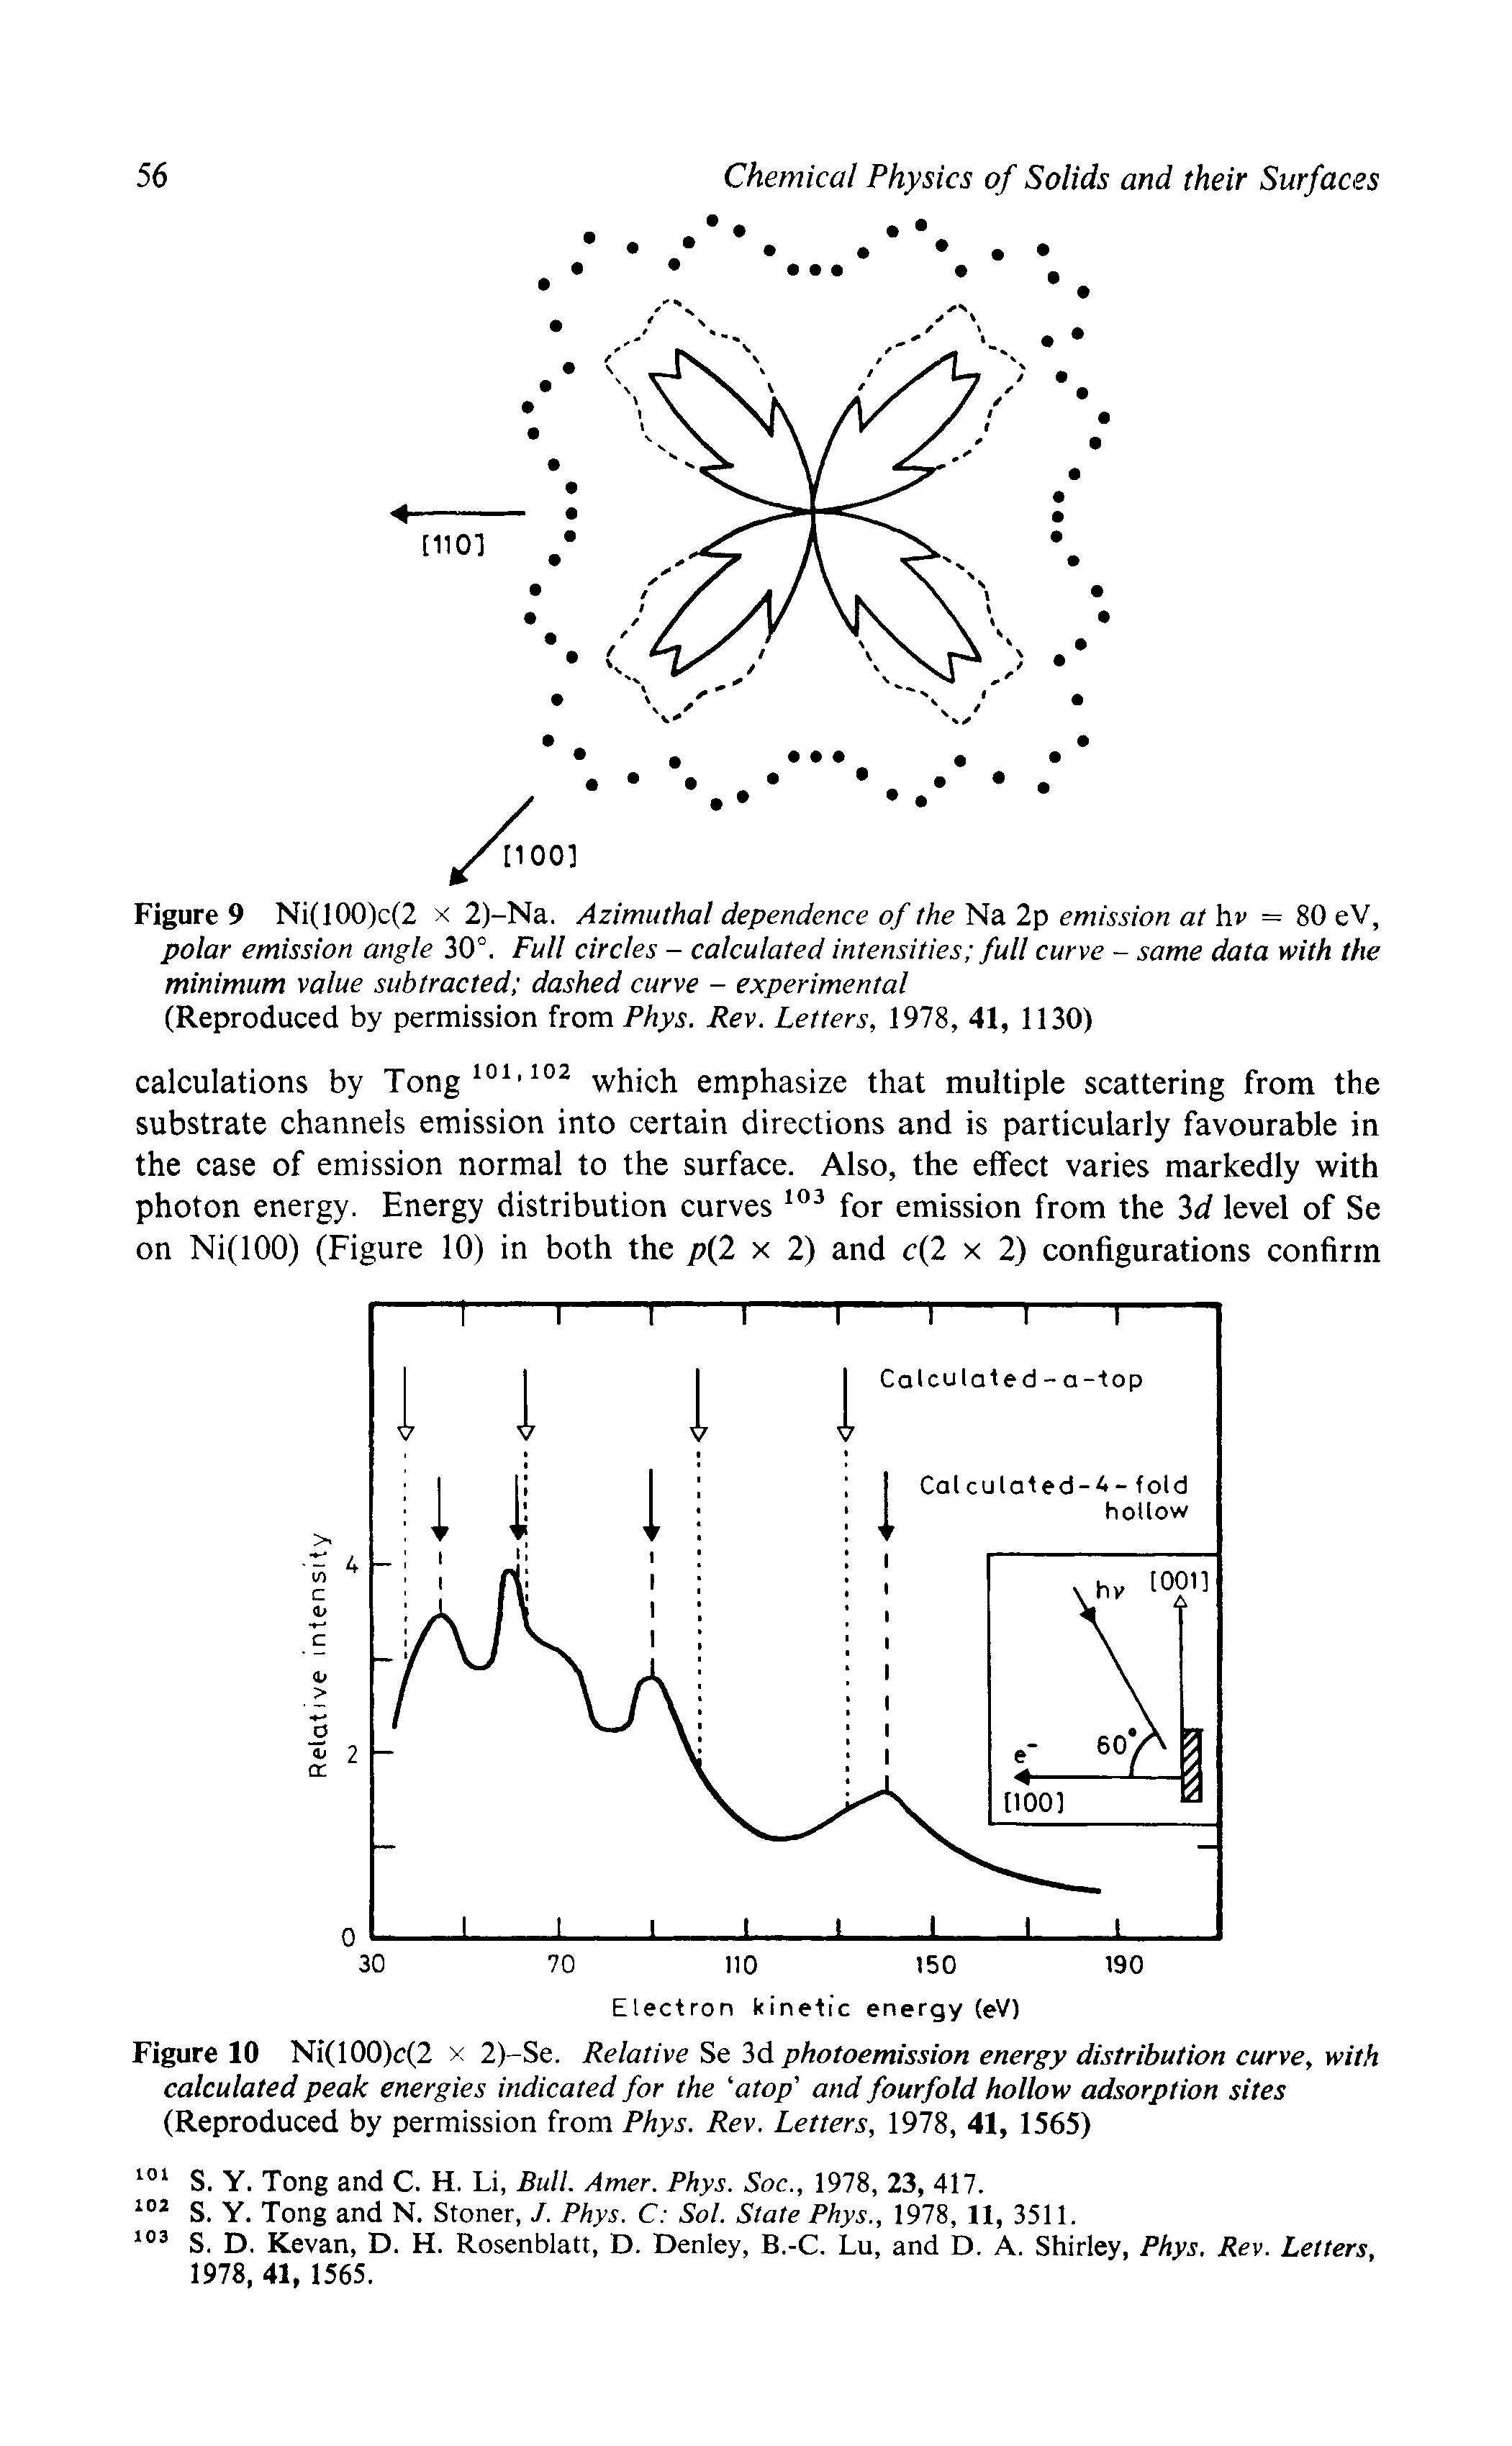 Figure 10 Ni(100)c(2 x 2)-Se. Relative Se 3d photoemission energy distribution curve, with calculated peak energies indicated for the atop and fourfold hollow adsorption sites (Reproduced by permission from Phys. Rev. Letters, 1978, 41, 1565)...